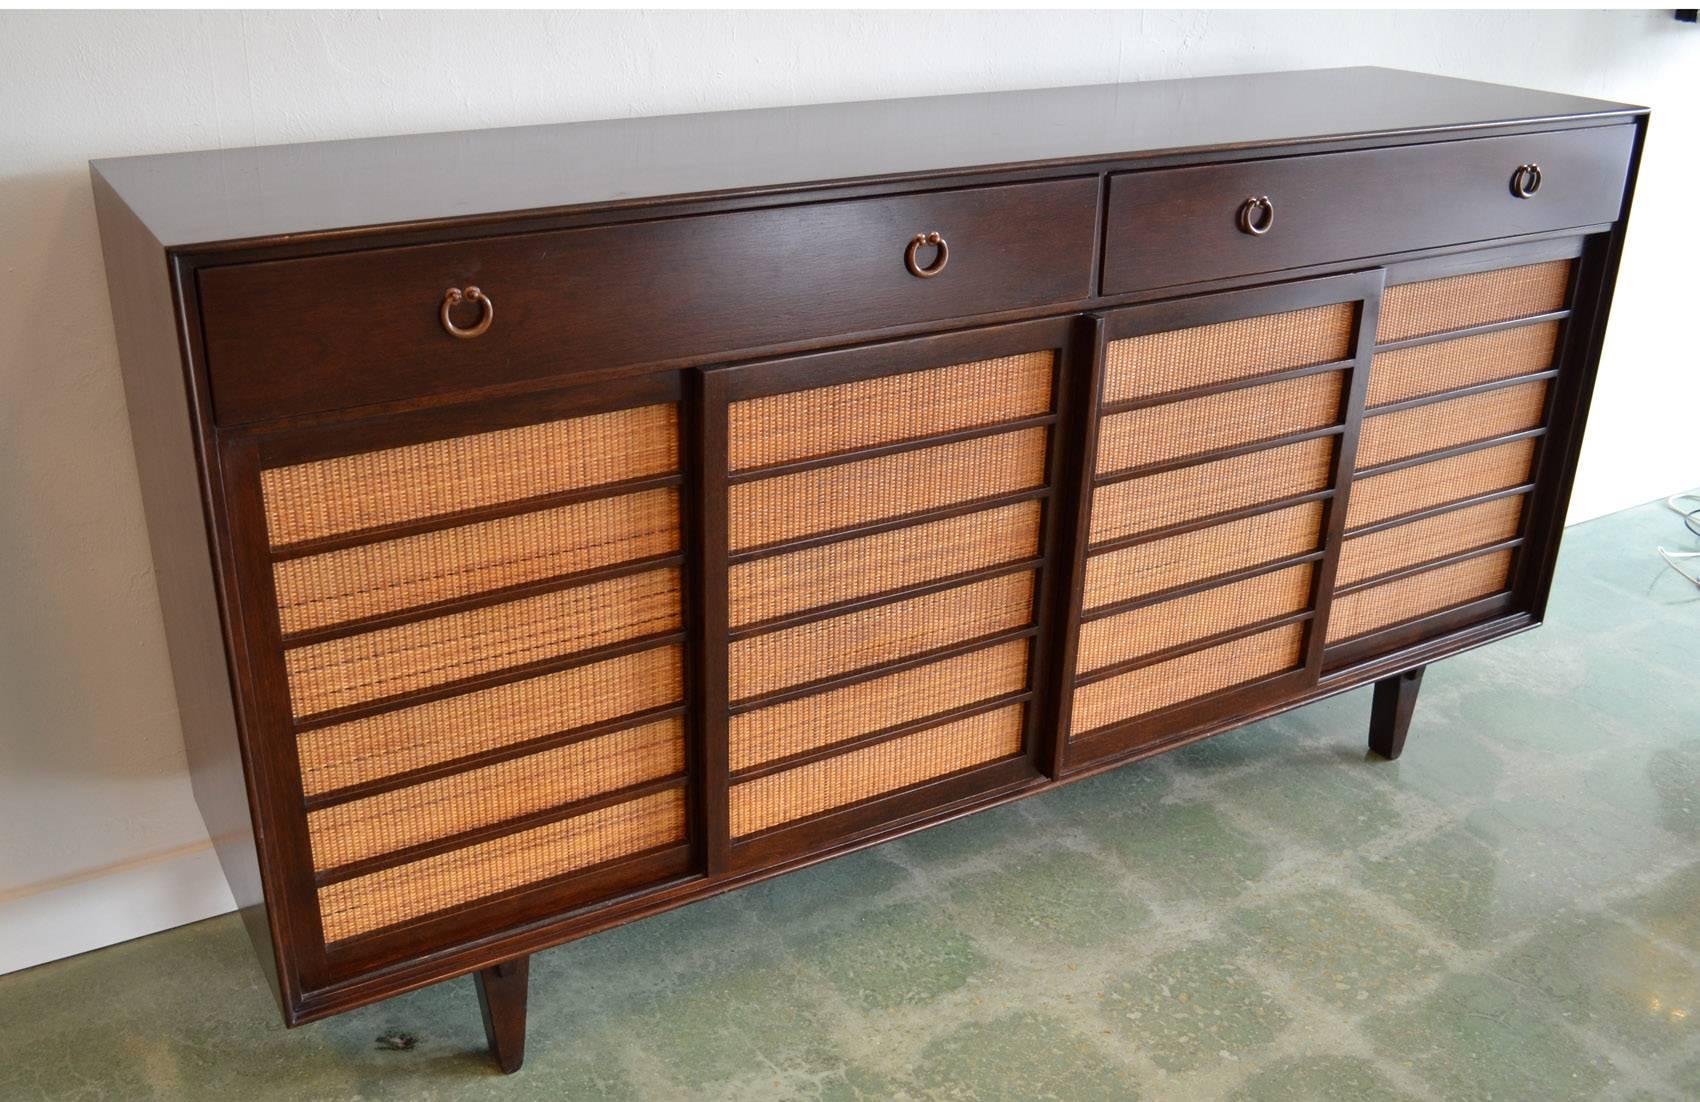 Sideboard credenza for Dunbar designed by Edward Wormley Mid-Century Modern grass front 671-A. Japanese-inspired in walnut with grass-covered sliding doors opening to pull-out and partitioned drawers with bronze pulls on exposed joinery legs.